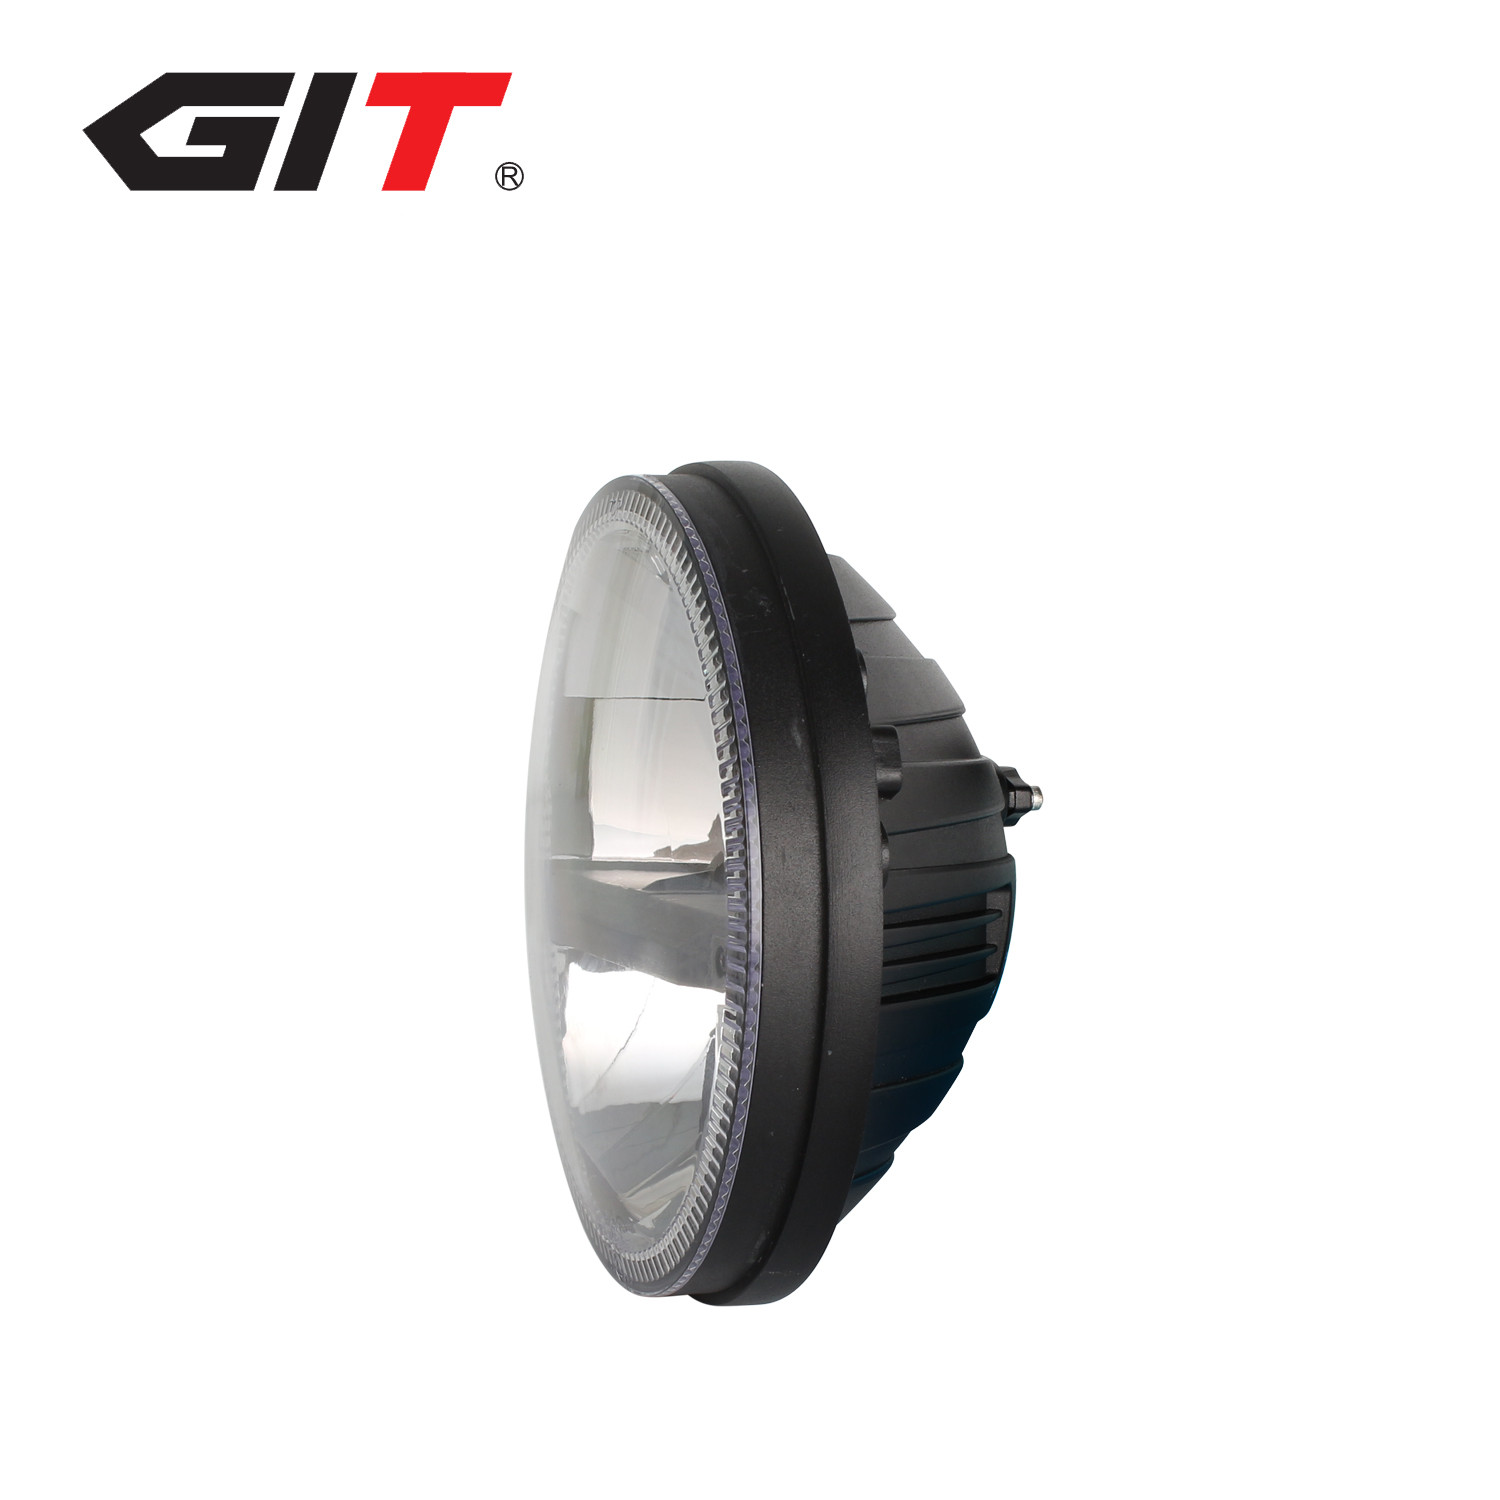 DOT 7" 24W Round Led Head Light for Offroad